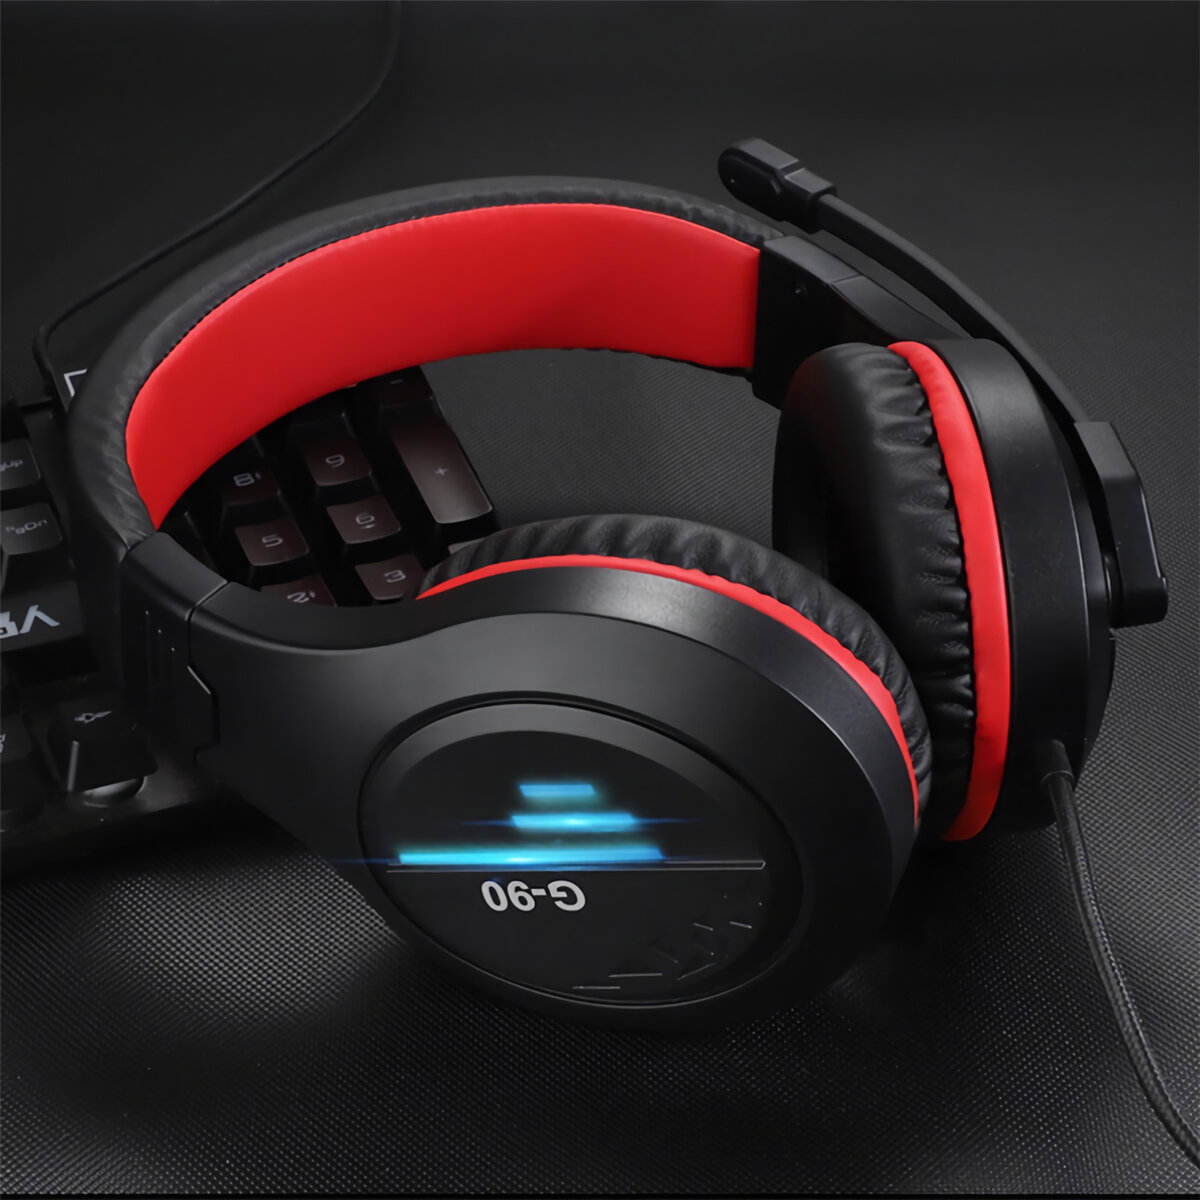 G90 gaming headset - G90 Gaming Headphone High Quality Voice Head Set Support All Devices - G90 Gaming Stereo Headphone